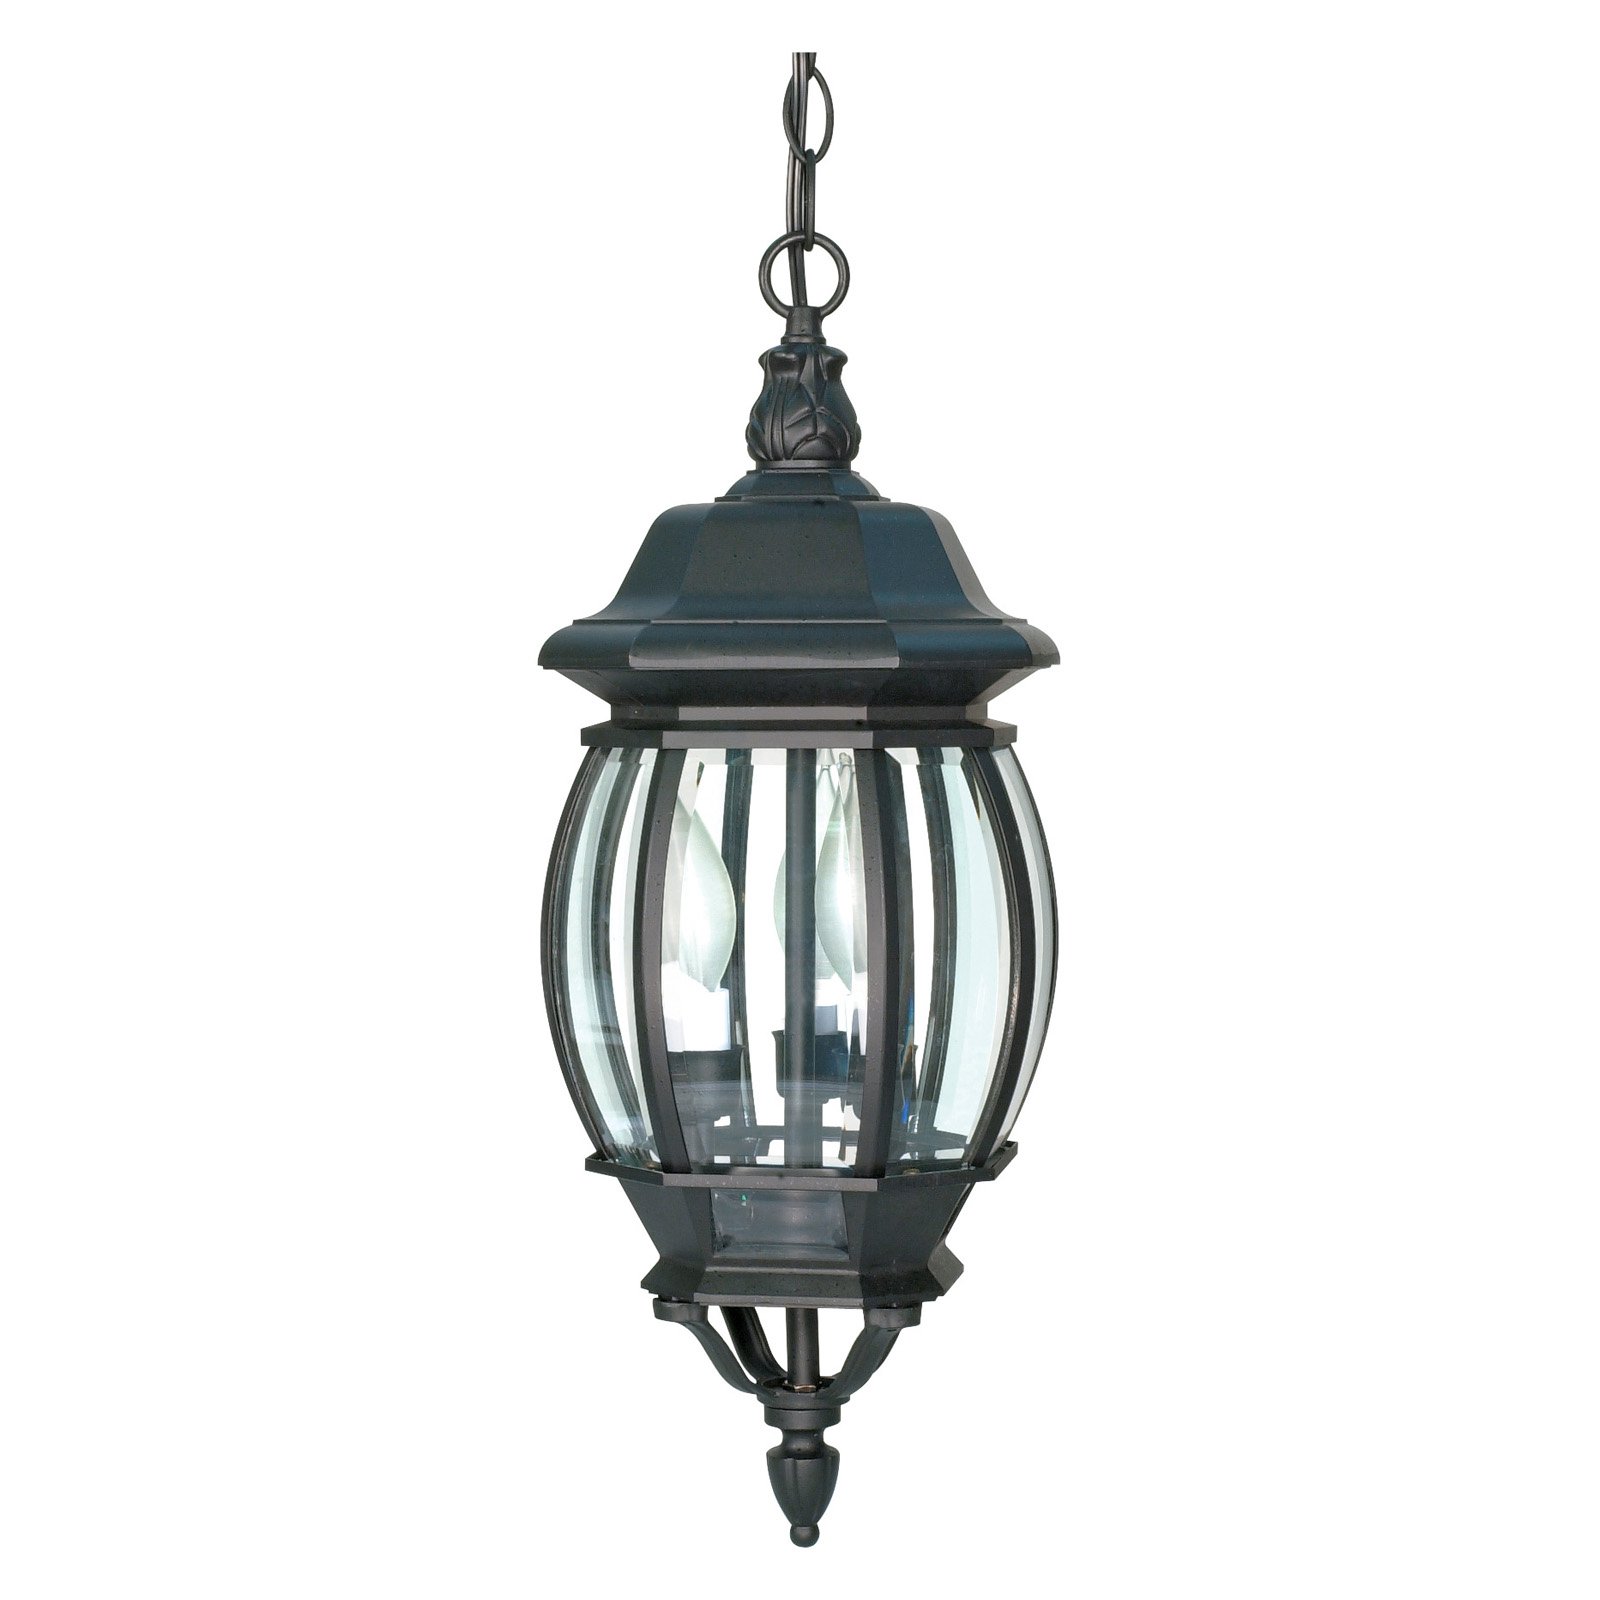 Nuvo 60-894 - Central Park - 3 Light - 20" - Hanging Lantern - w/ Clear Beveled Glass - image 2 of 2